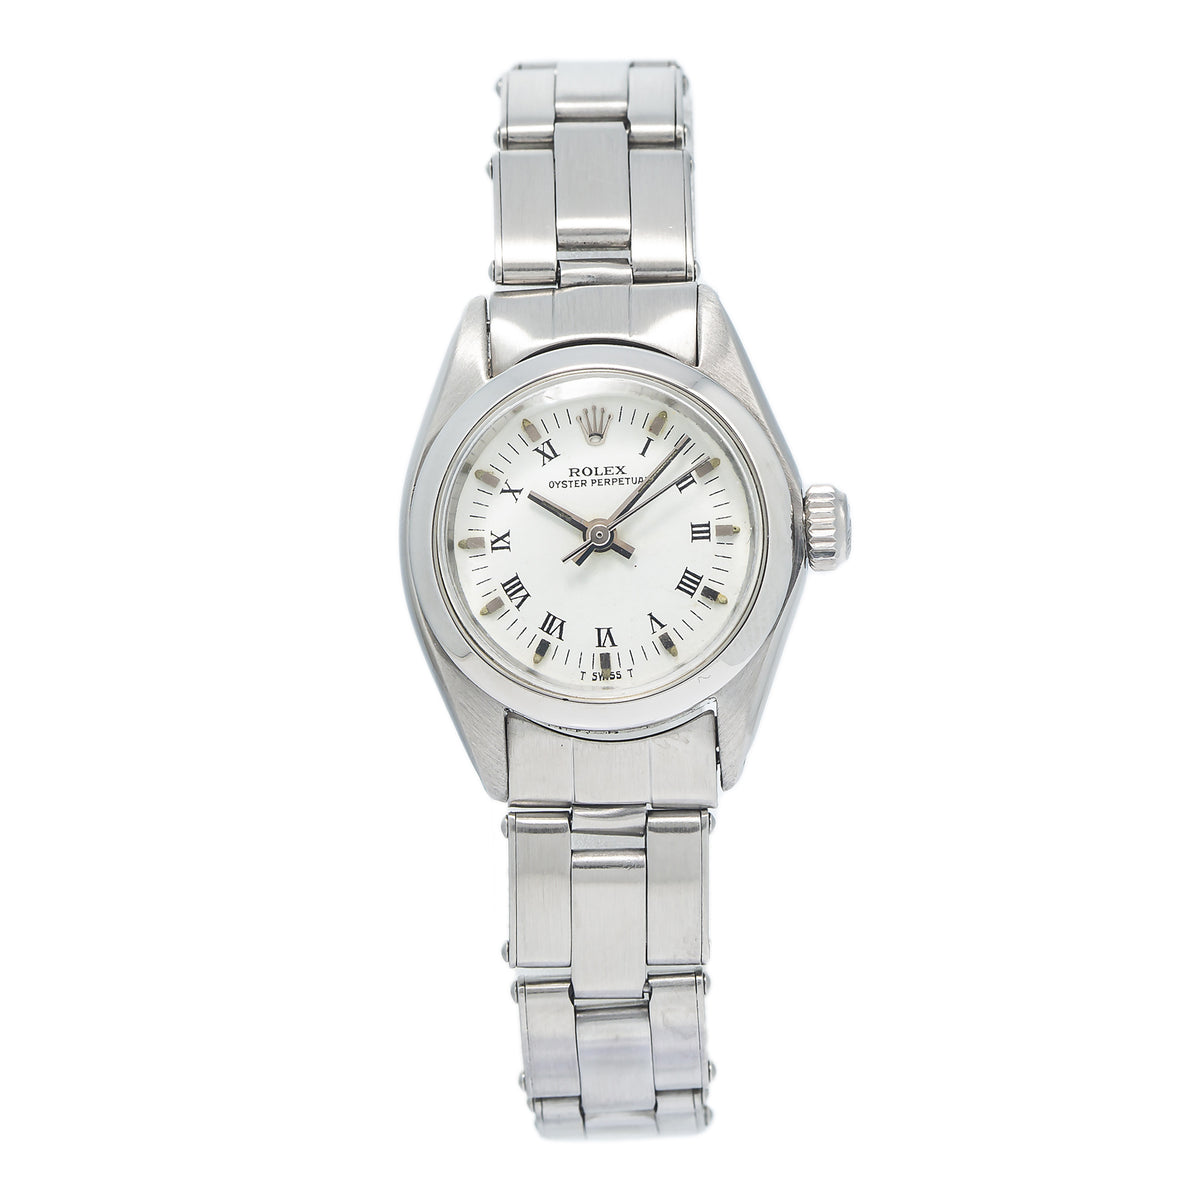 Rolex Oyster Perpetual 6718 Stainless Steel White Dial Automatic Lady Watch 25mm